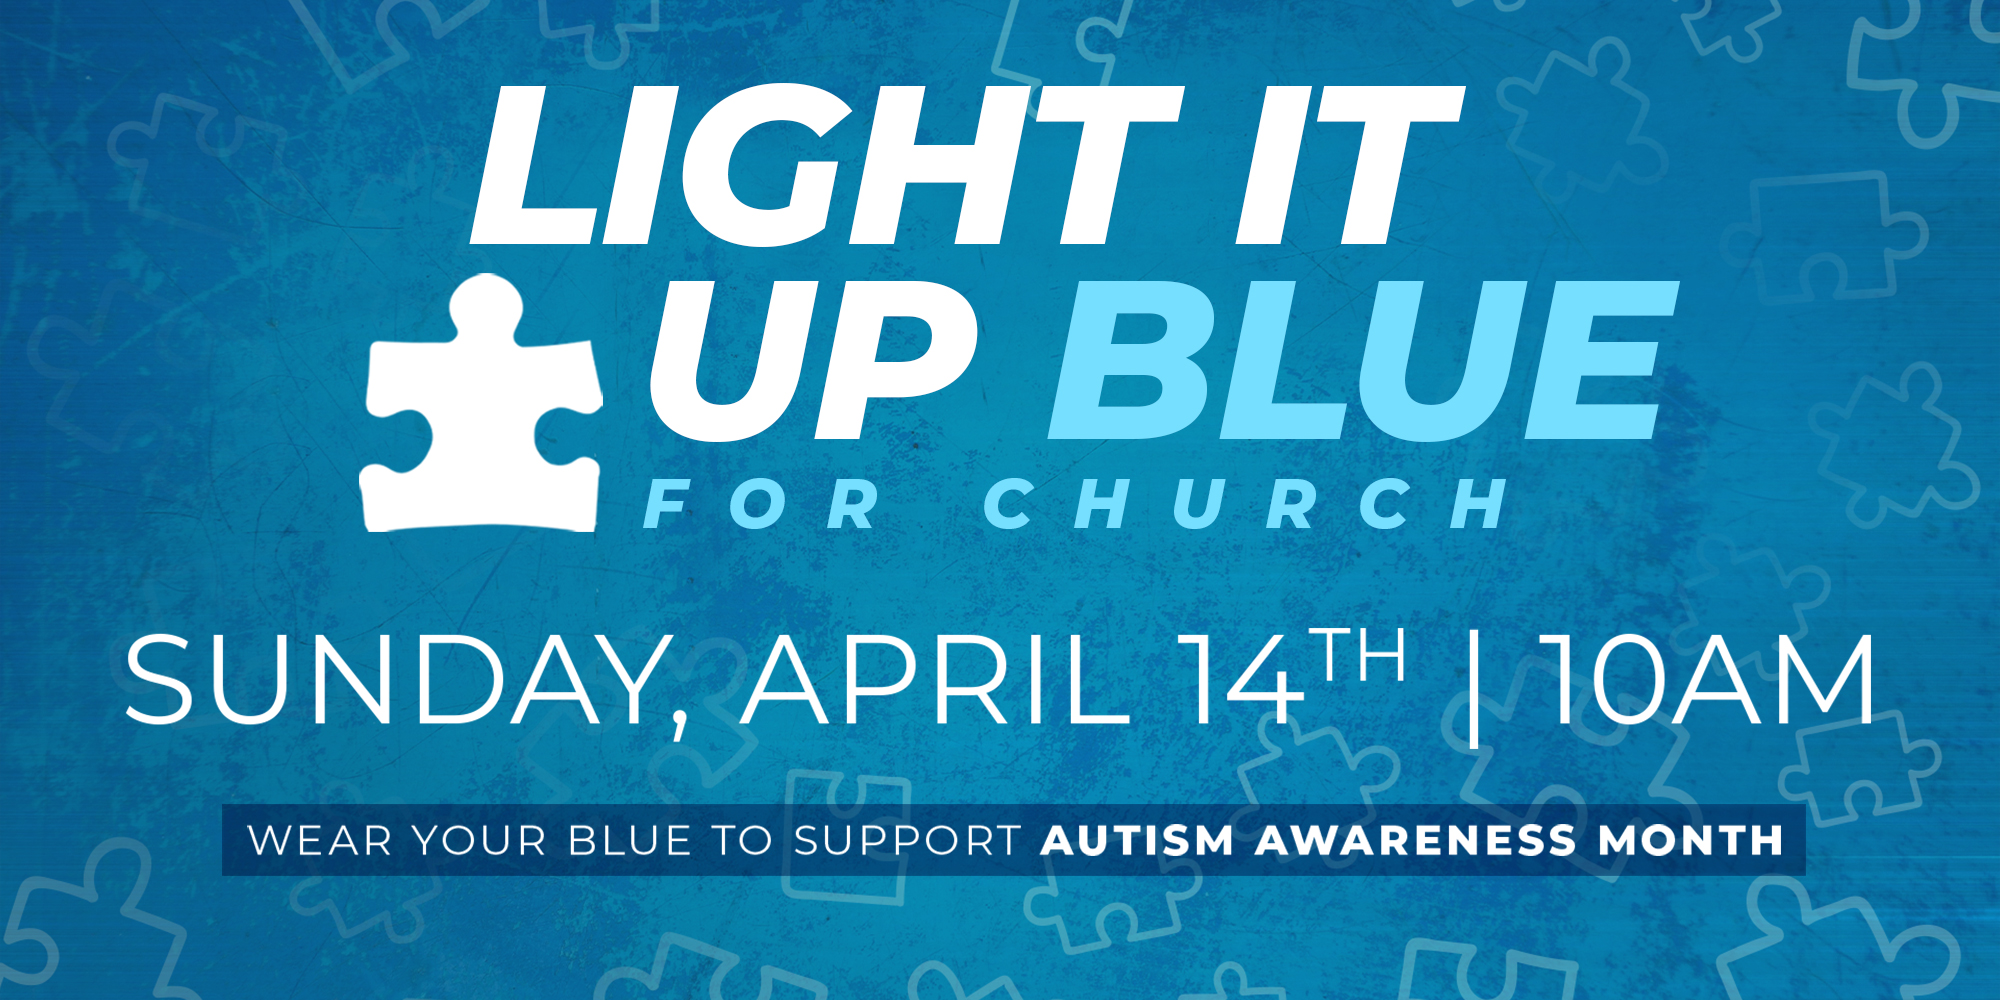 Light it up Blue for Church Sunday, April 14th 10am Wear Your Blue to Support Autism Awareness Month